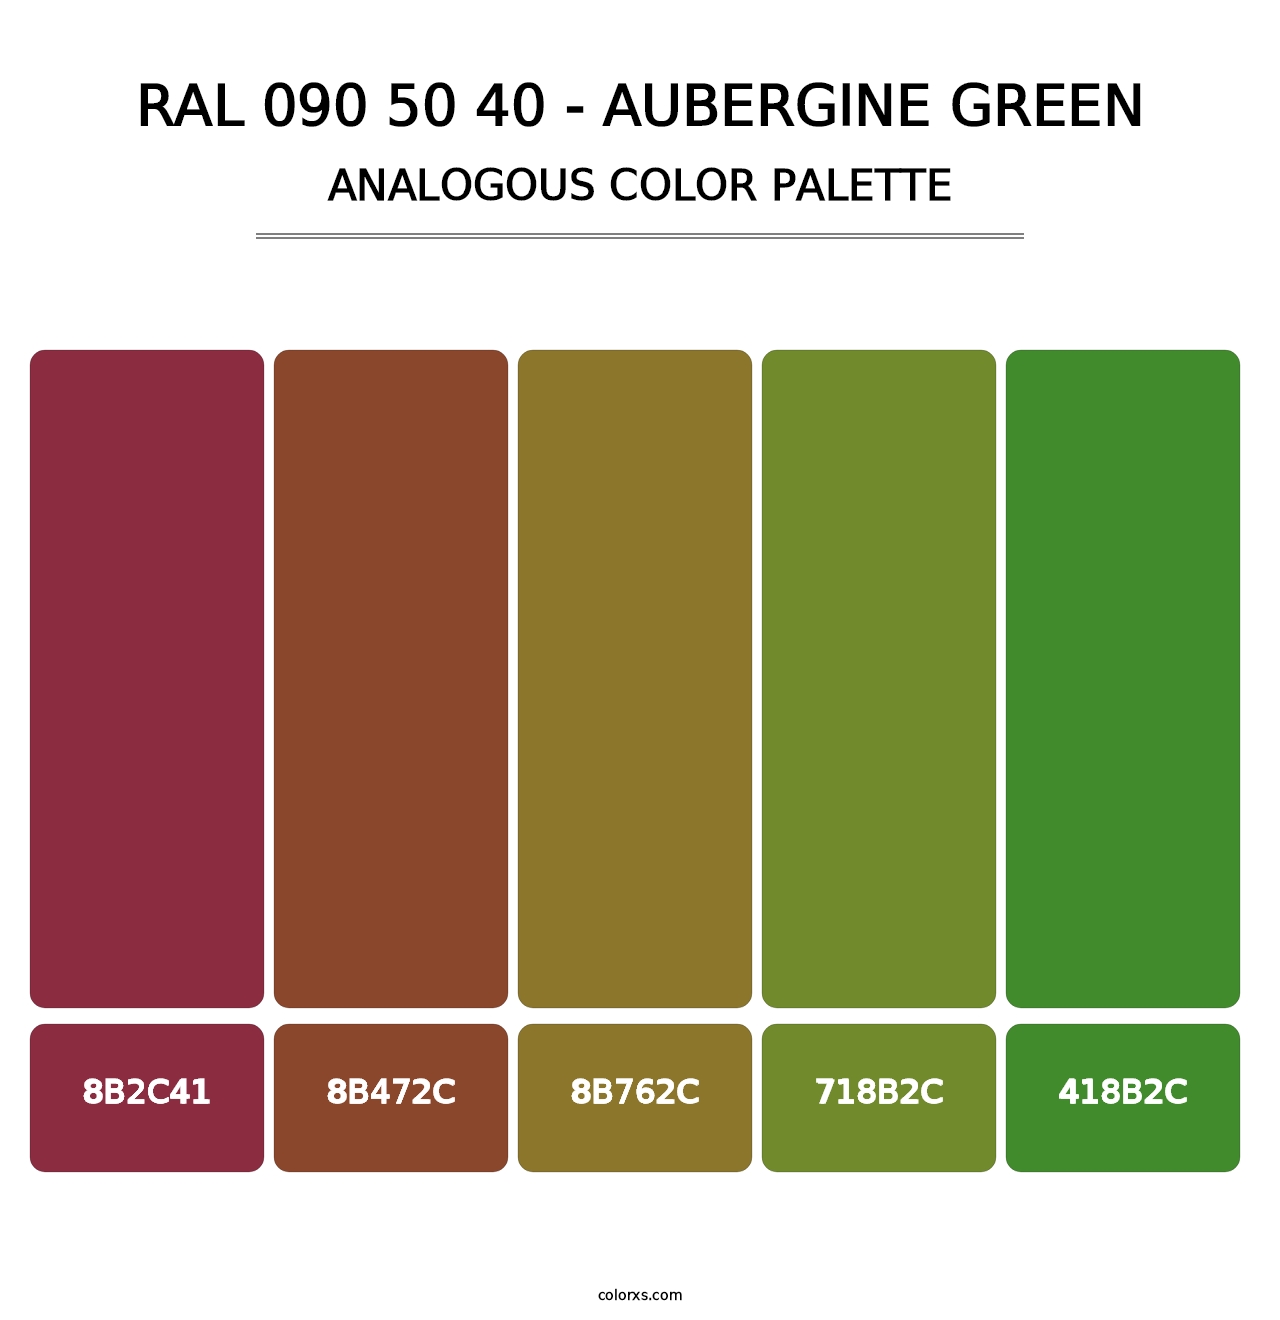 RAL 090 50 40 - Aubergine Green - Analogous Color Palette